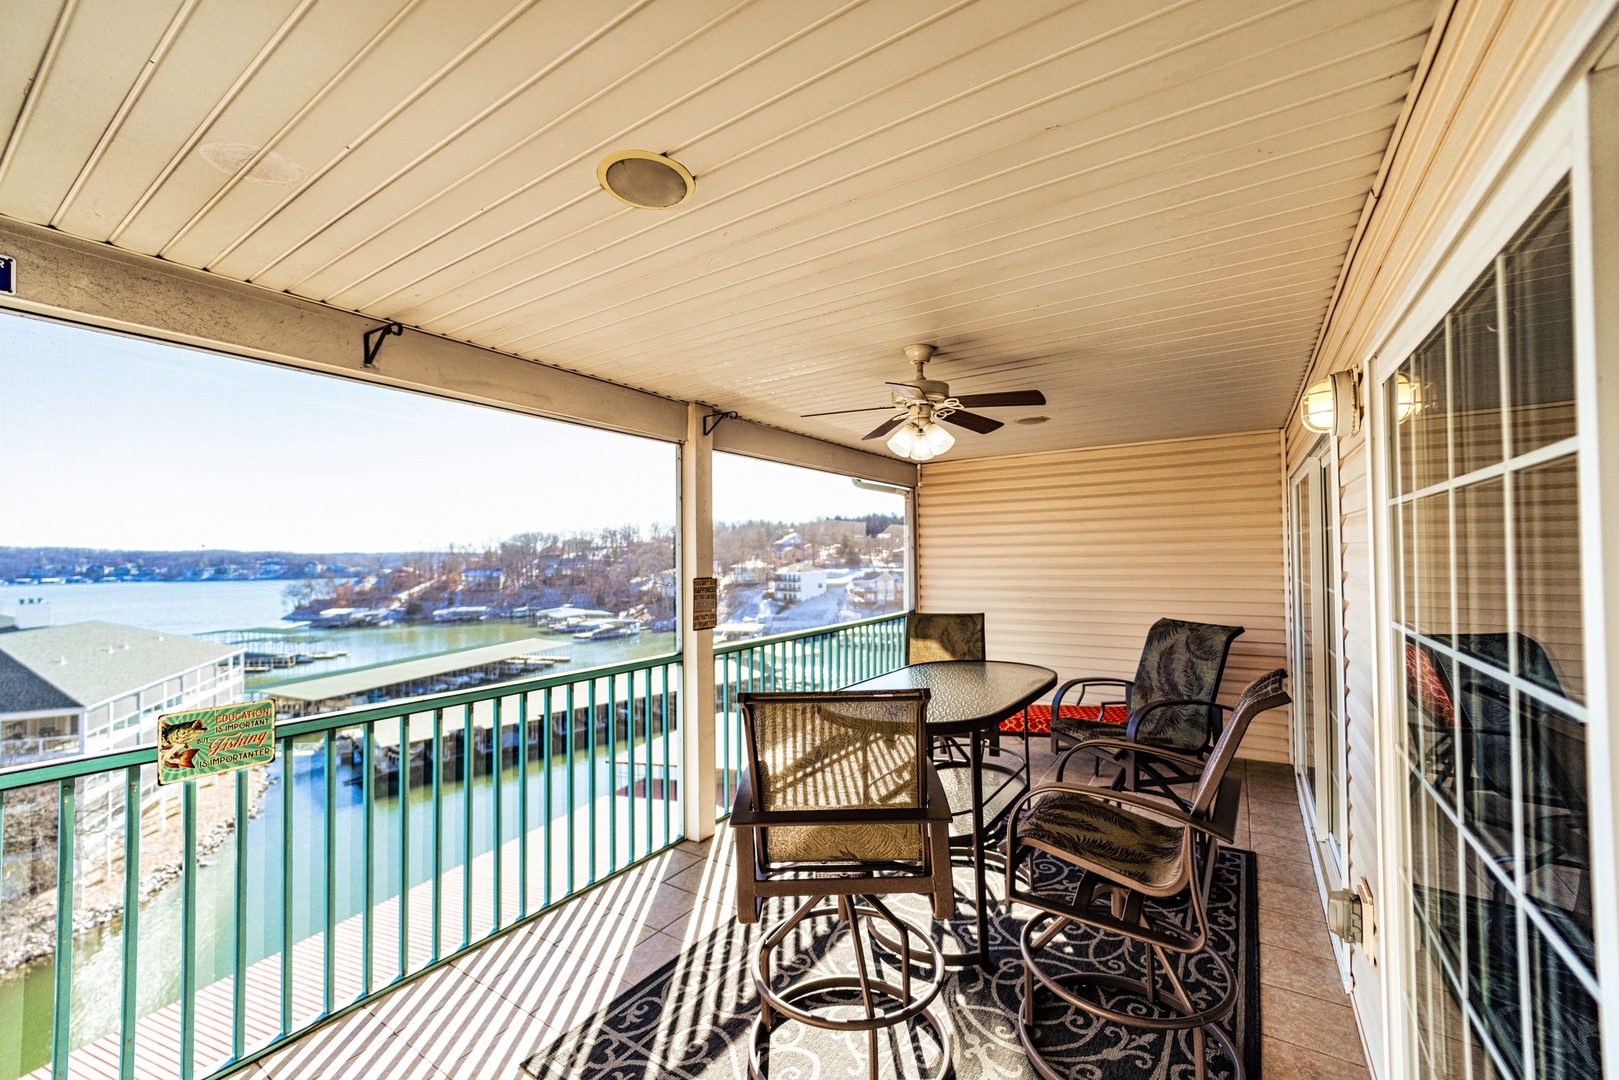 Lounge the day away with gorgeous lake views on the screened deck